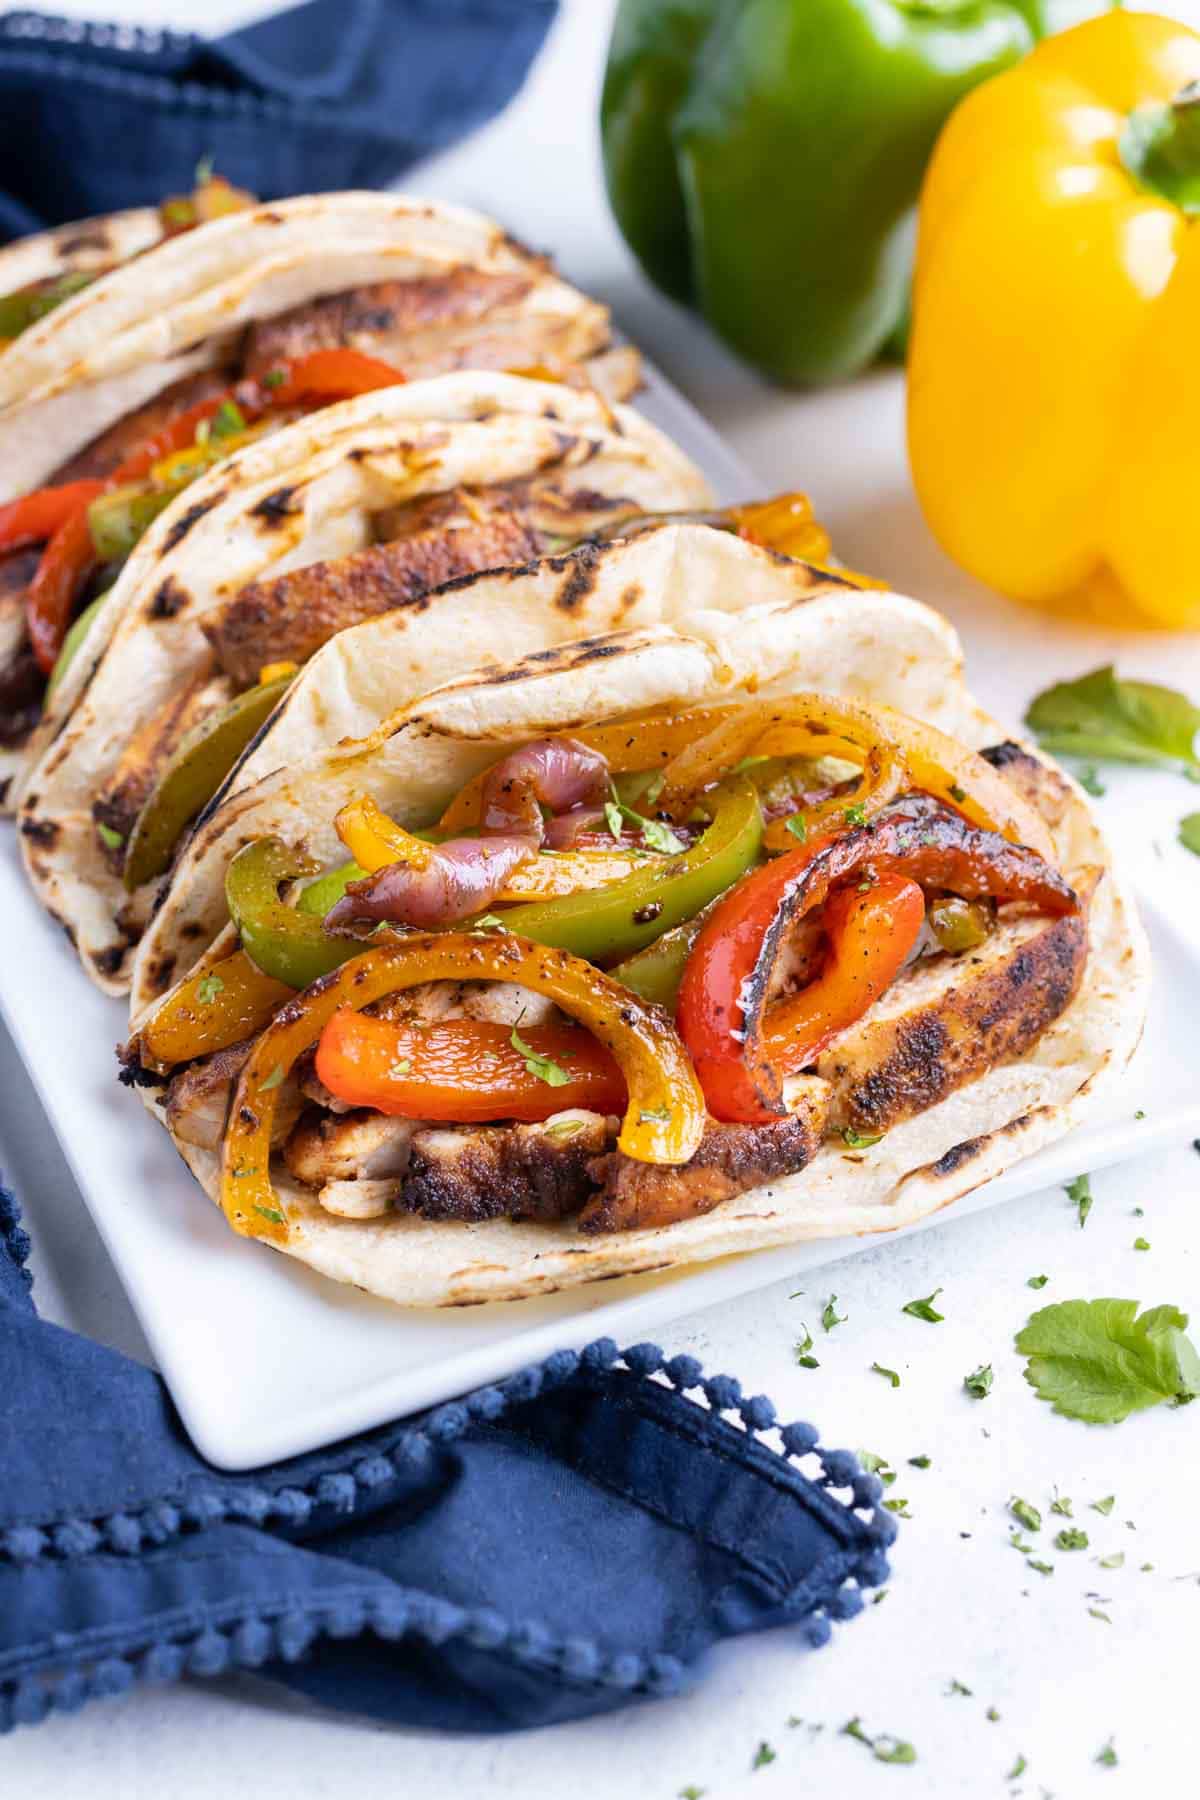 Fajita vegetables are served in tacos on a plate.